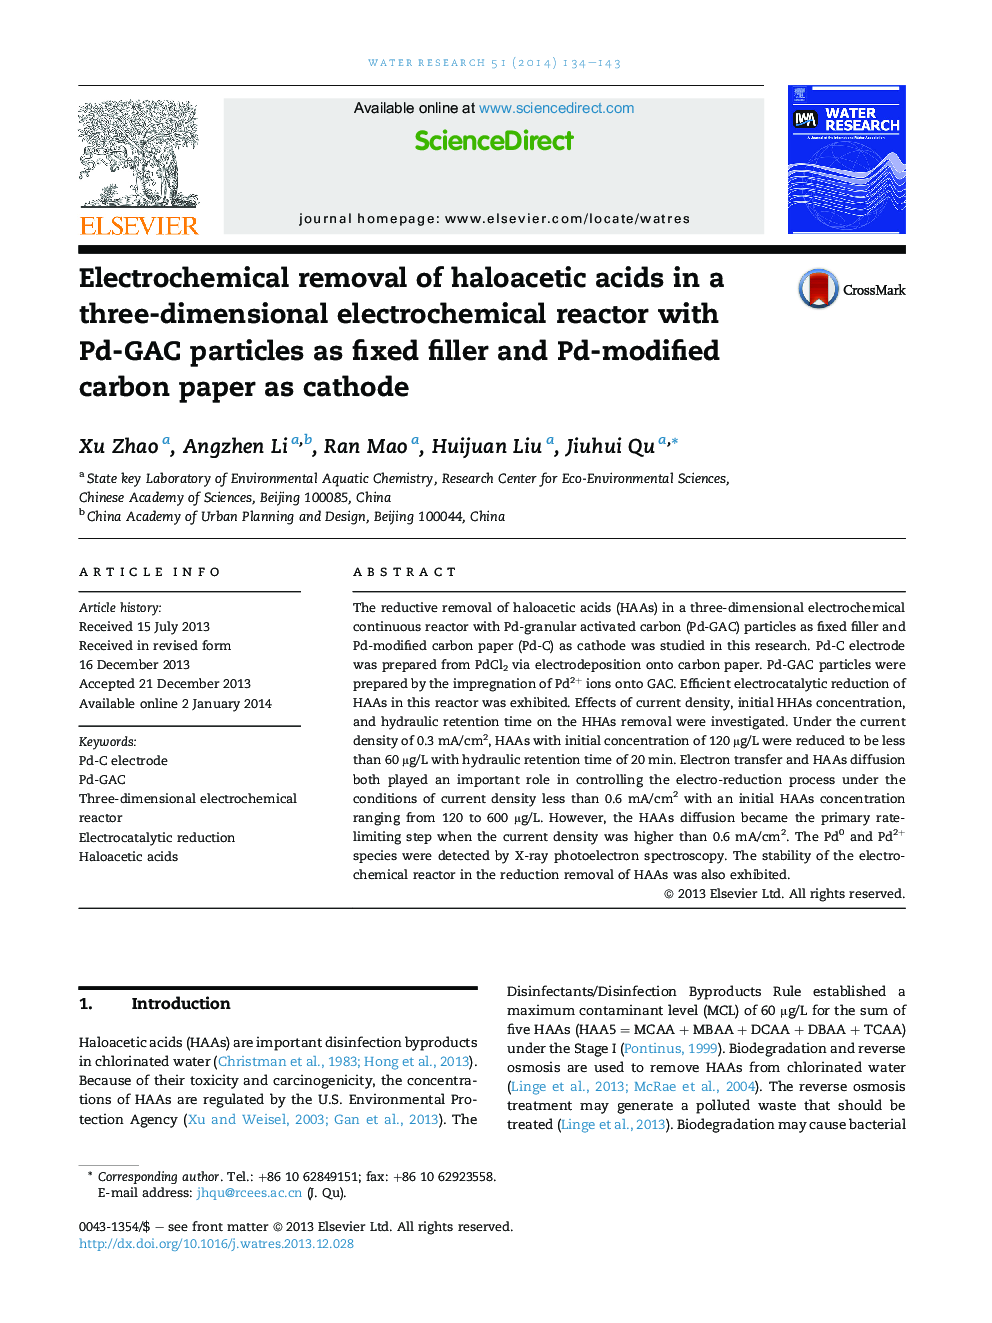 Electrochemical removal of haloacetic acids in a three-dimensional electrochemical reactor with Pd-GAC particles as fixed filler and Pd-modified carbon paper as cathode